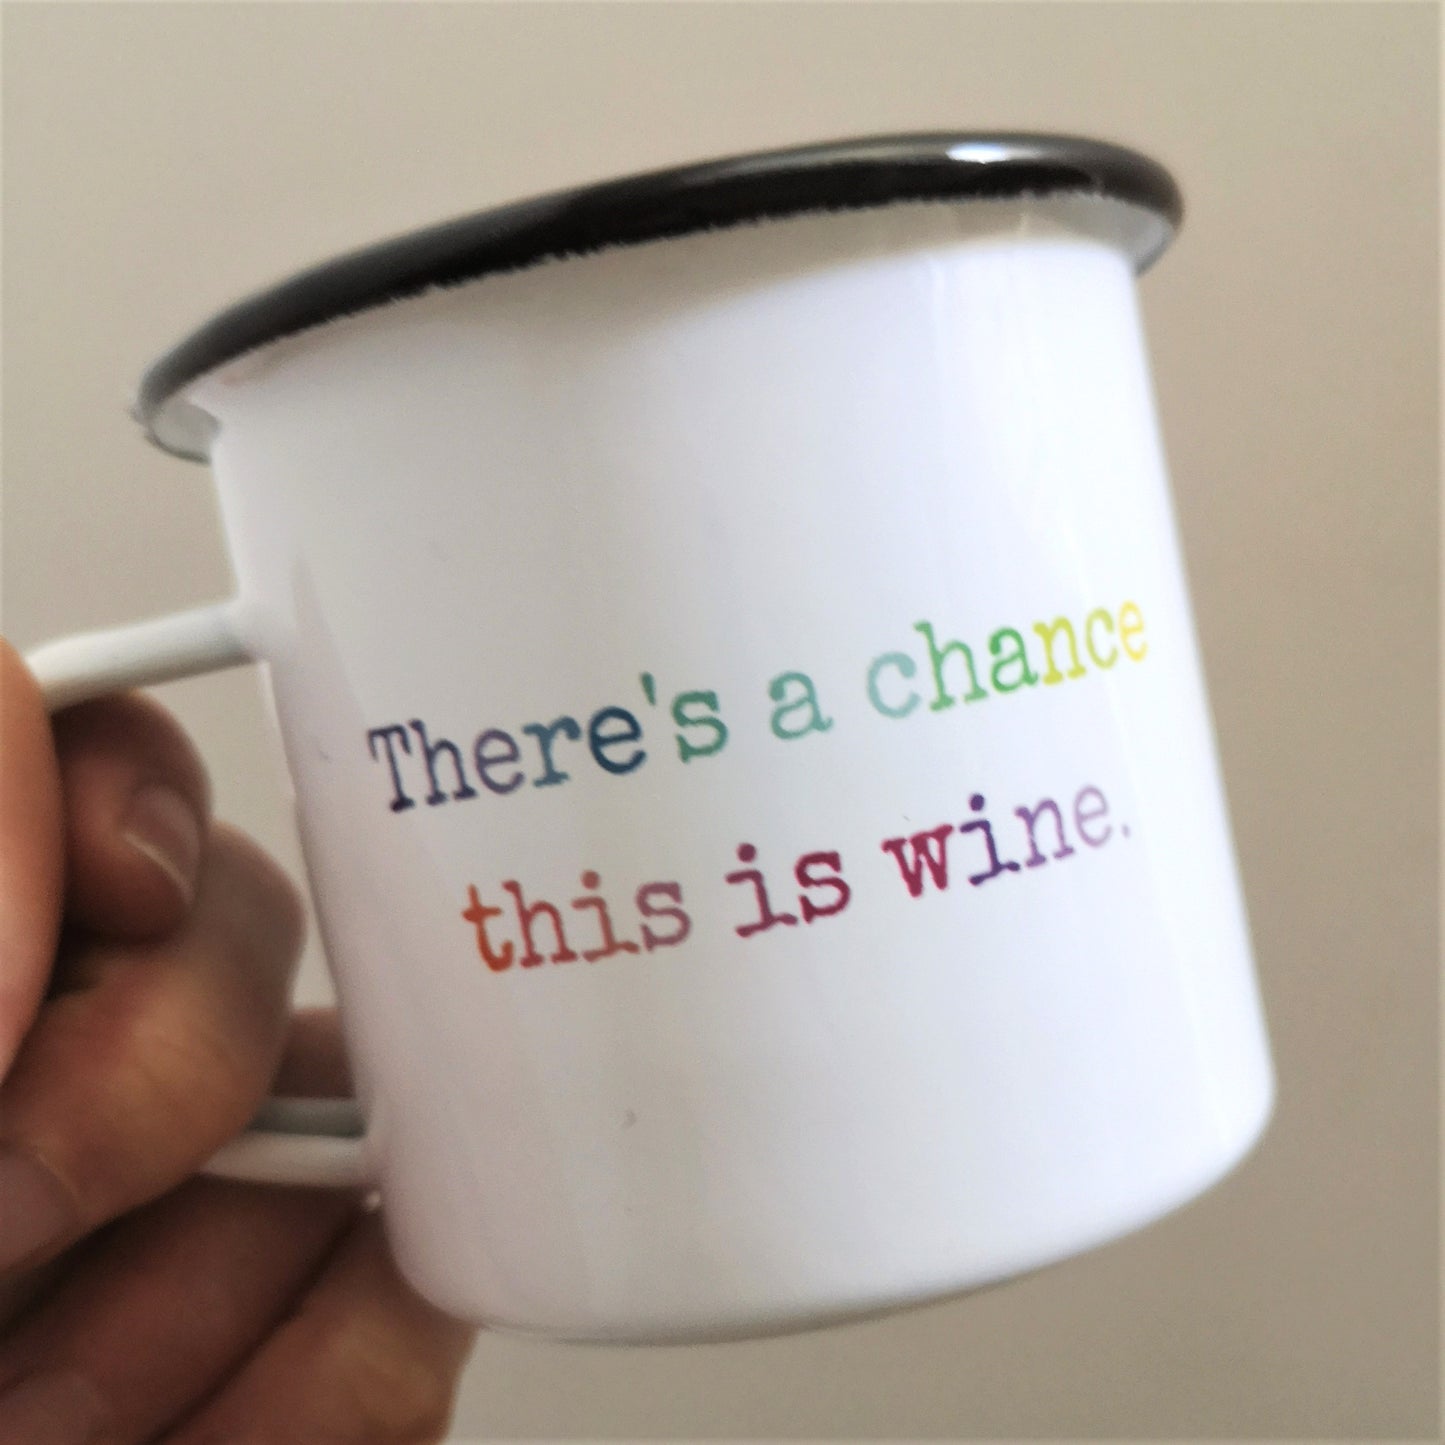 A close up of a hand holding a White enamel mug with a black rim with the following on the front in rainbow lettering - there's a chance this is wine